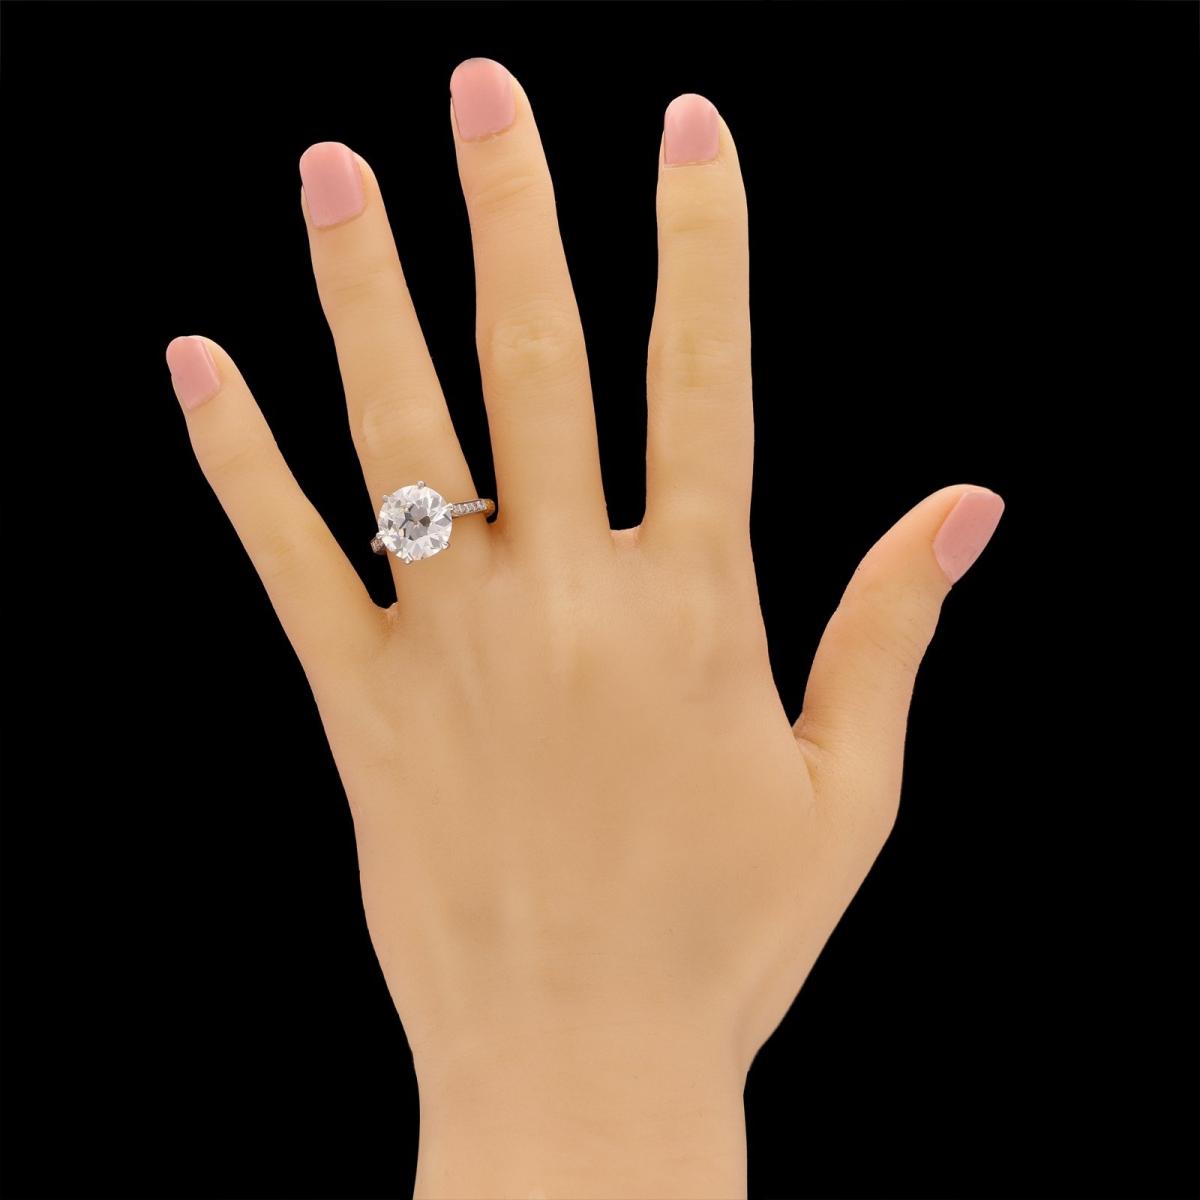 5.95ct old European brilliant cut diamond solitaire ring with diamond-set band.